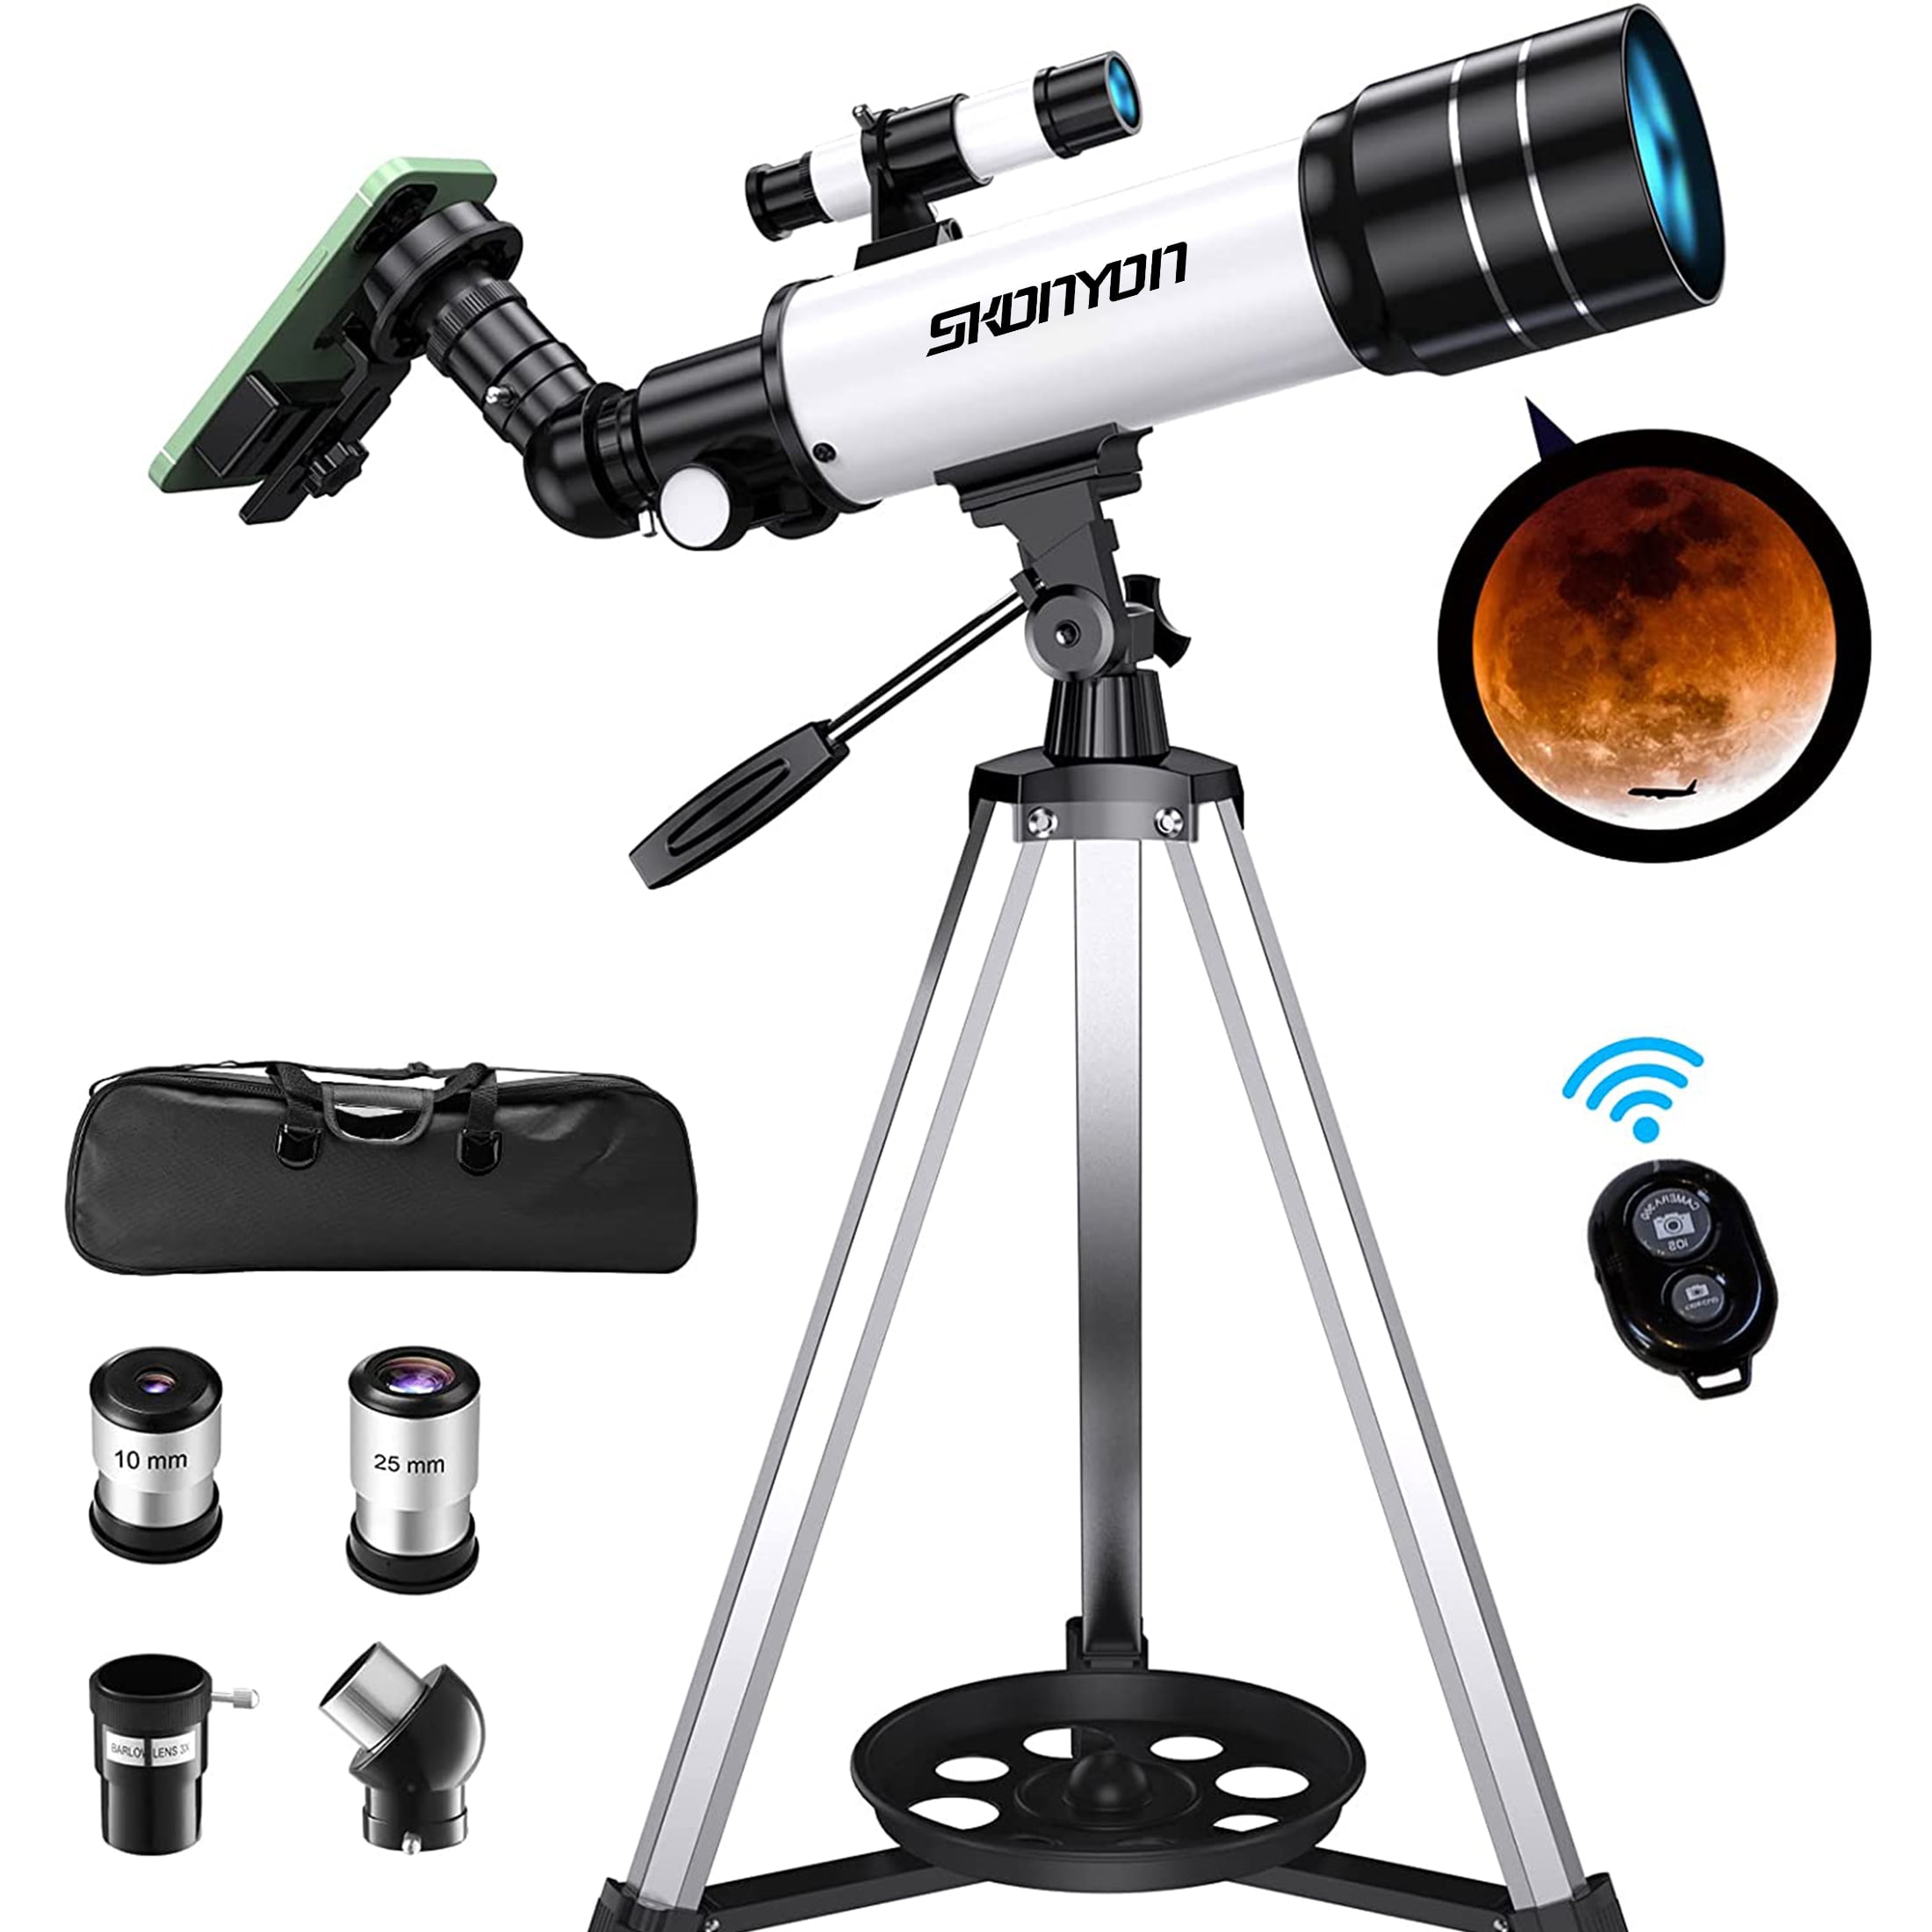 Zoom 120X Outdoor Monocular Telescopes 70/400mm Portable Astronomical Telescopes for Kids Beginners Adult Refractor Telescope Great Gift for Kids Phone Adapter Color : White , Size : Package 3 